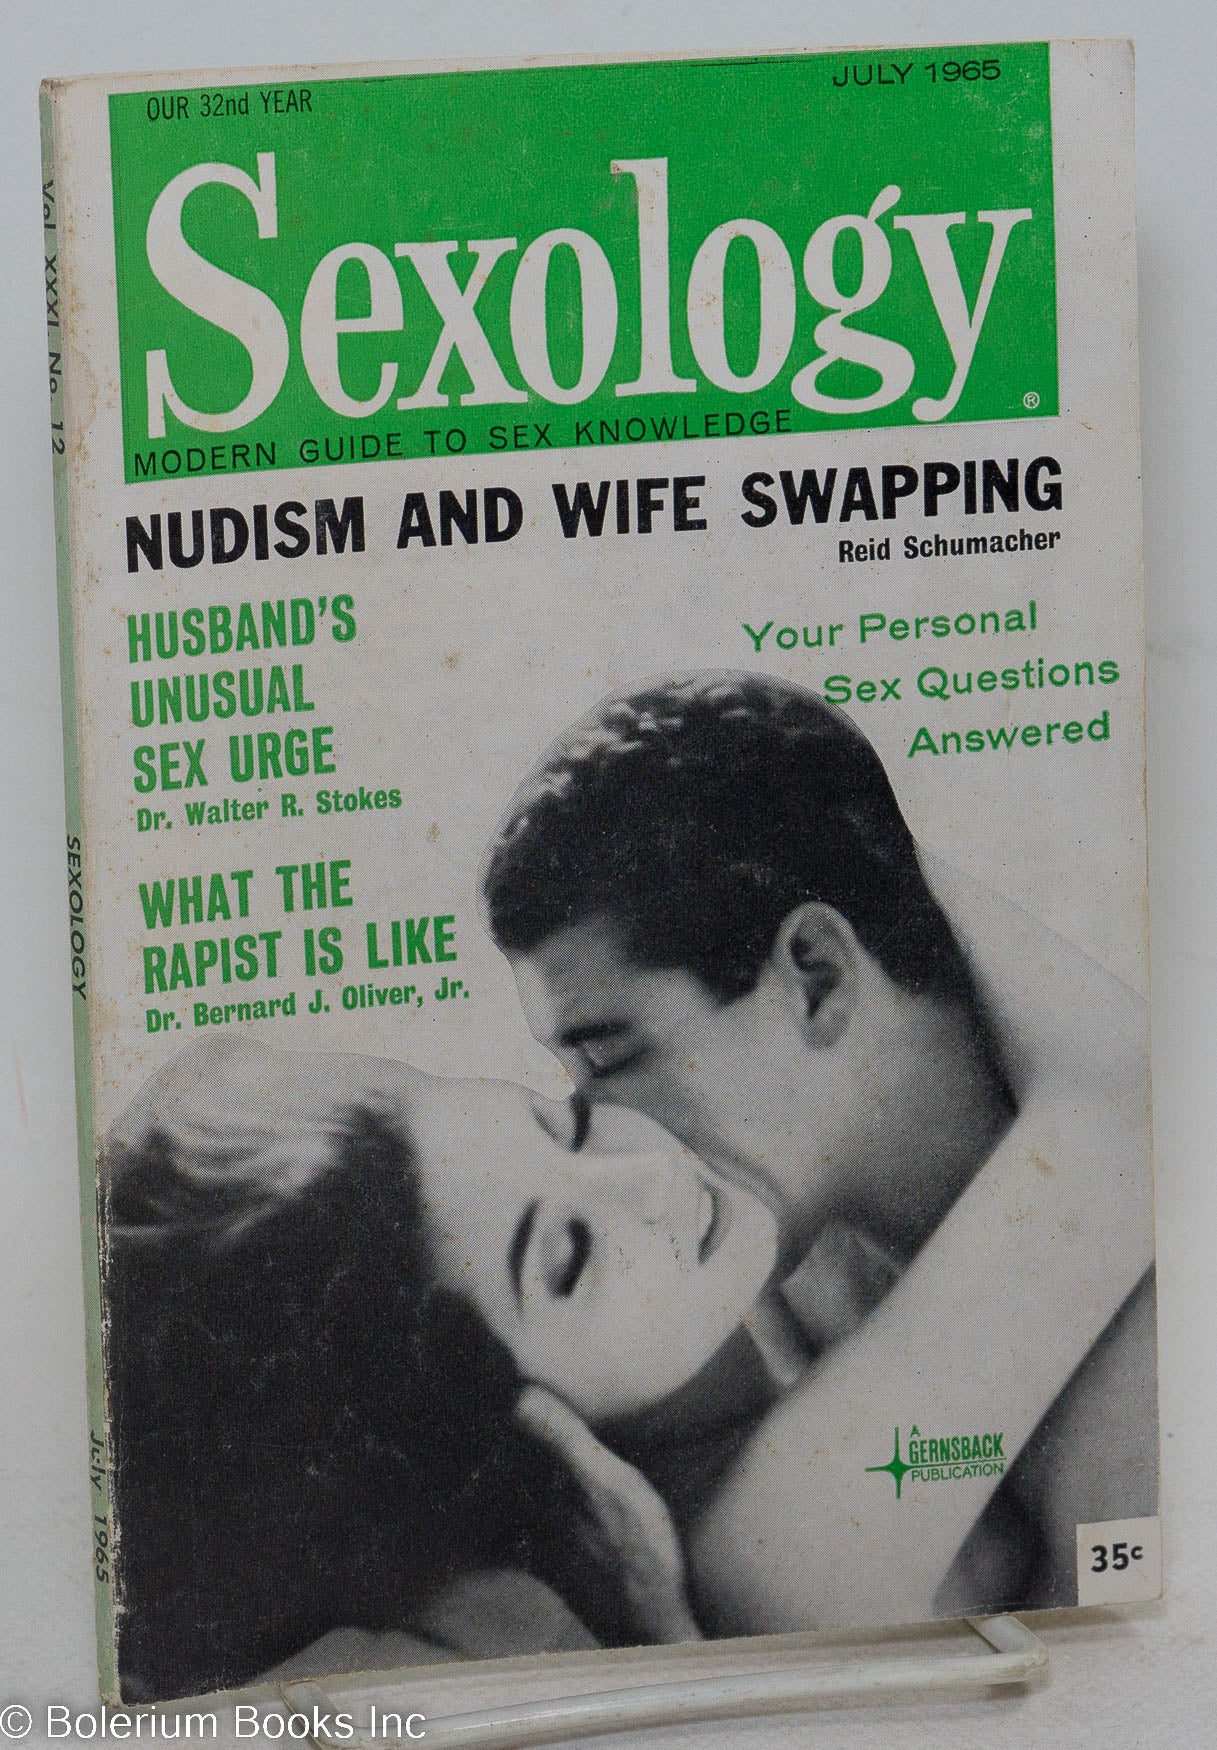 Sexology modern guide to sex knowledge; image